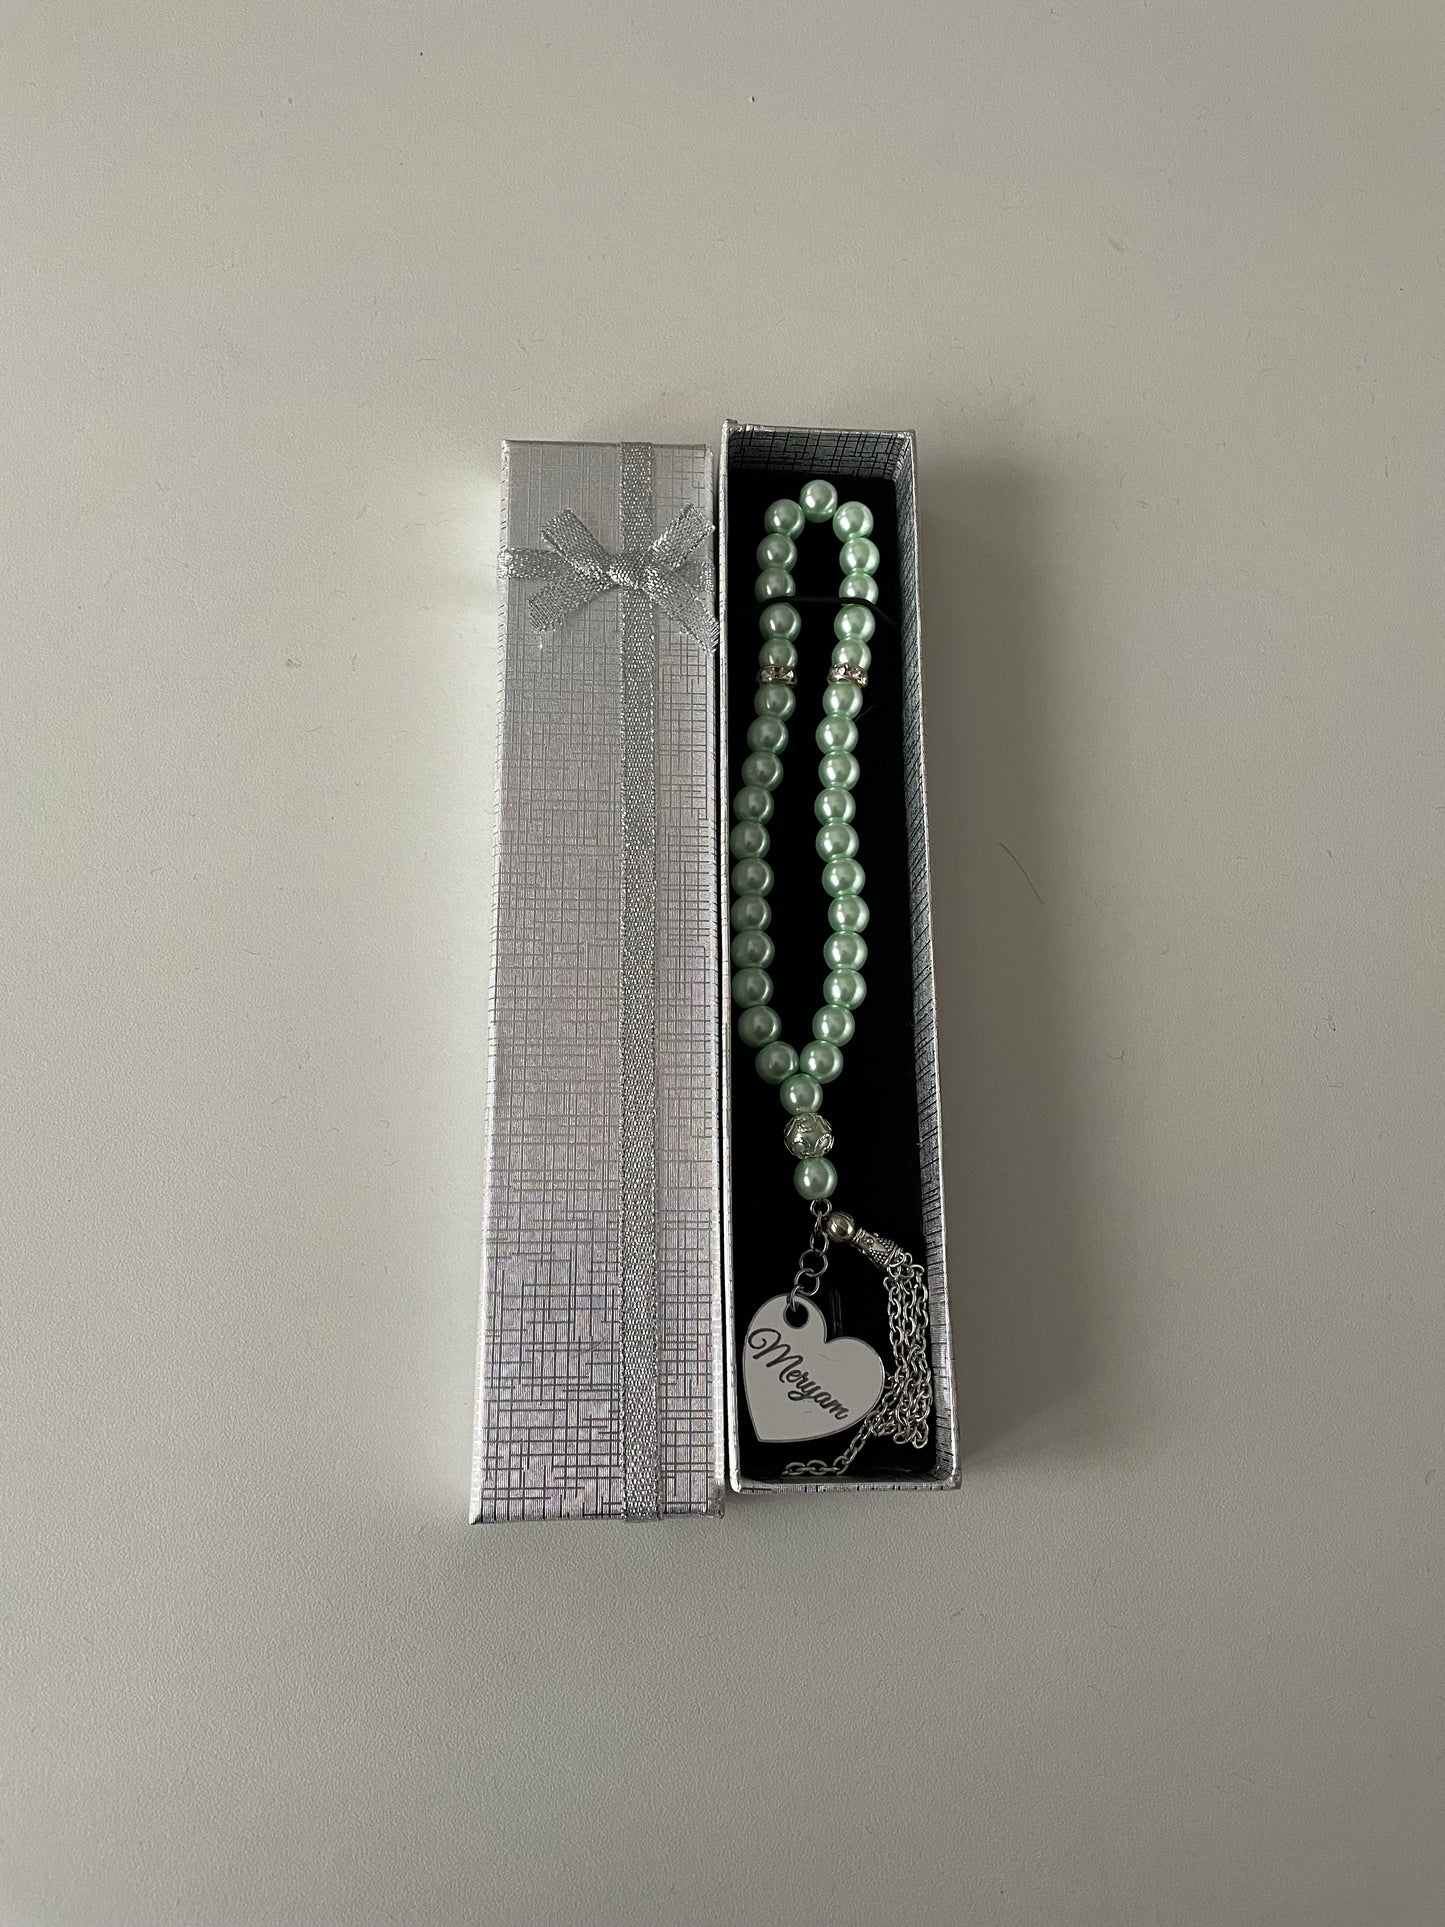 33 Beads Tasbih with Silver Accents and 1 Acryl Name